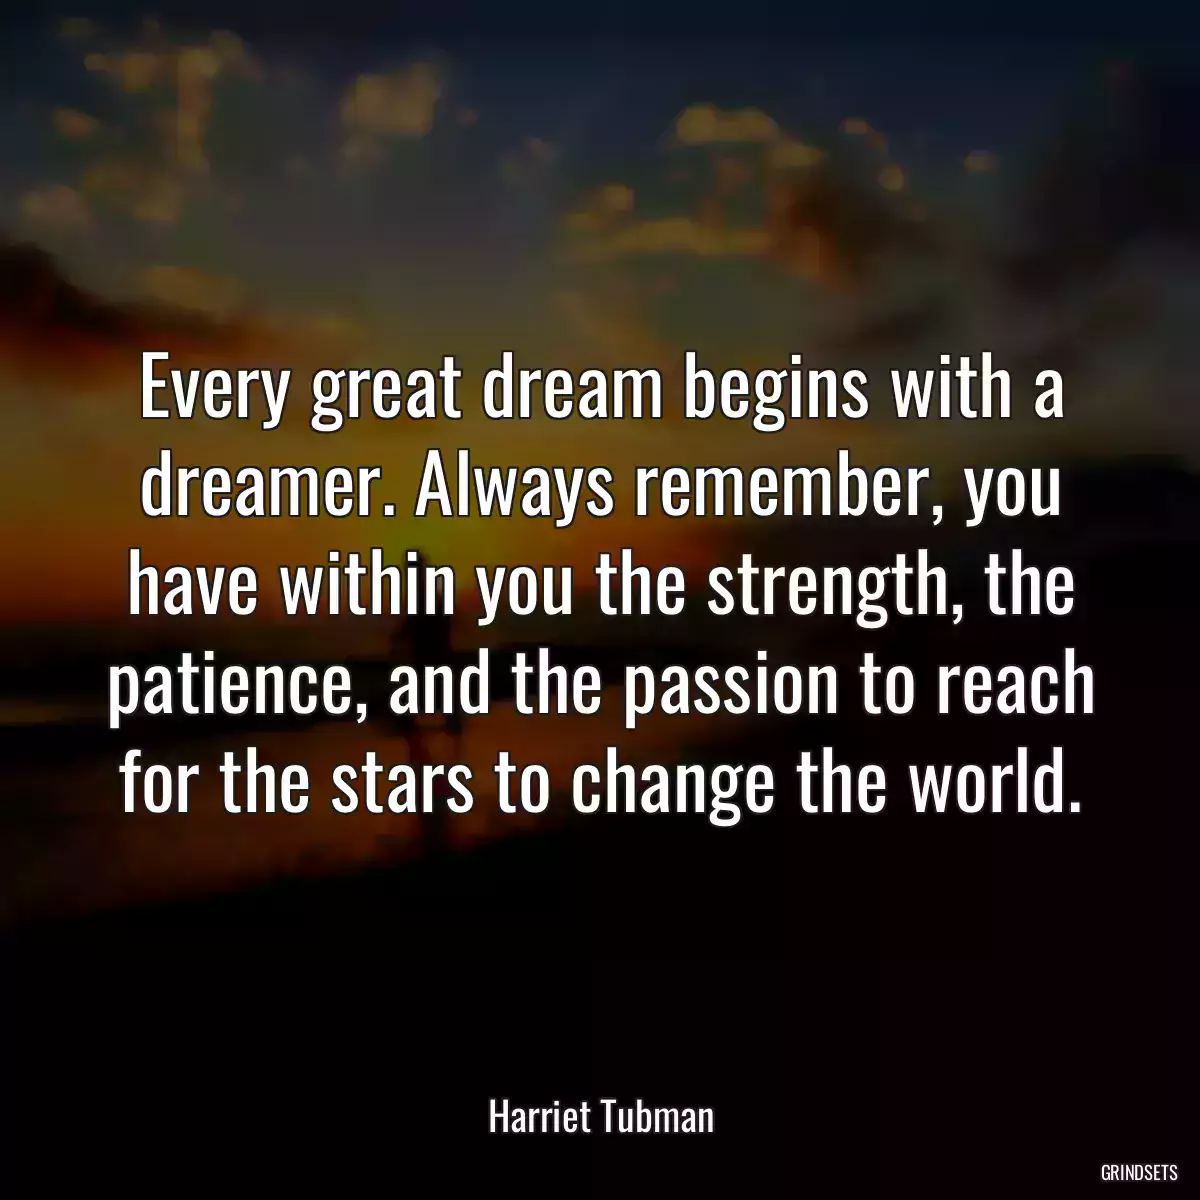 Every great dream begins with a dreamer. Always remember, you have within you the strength, the patience, and the passion to reach for the stars to change the world.